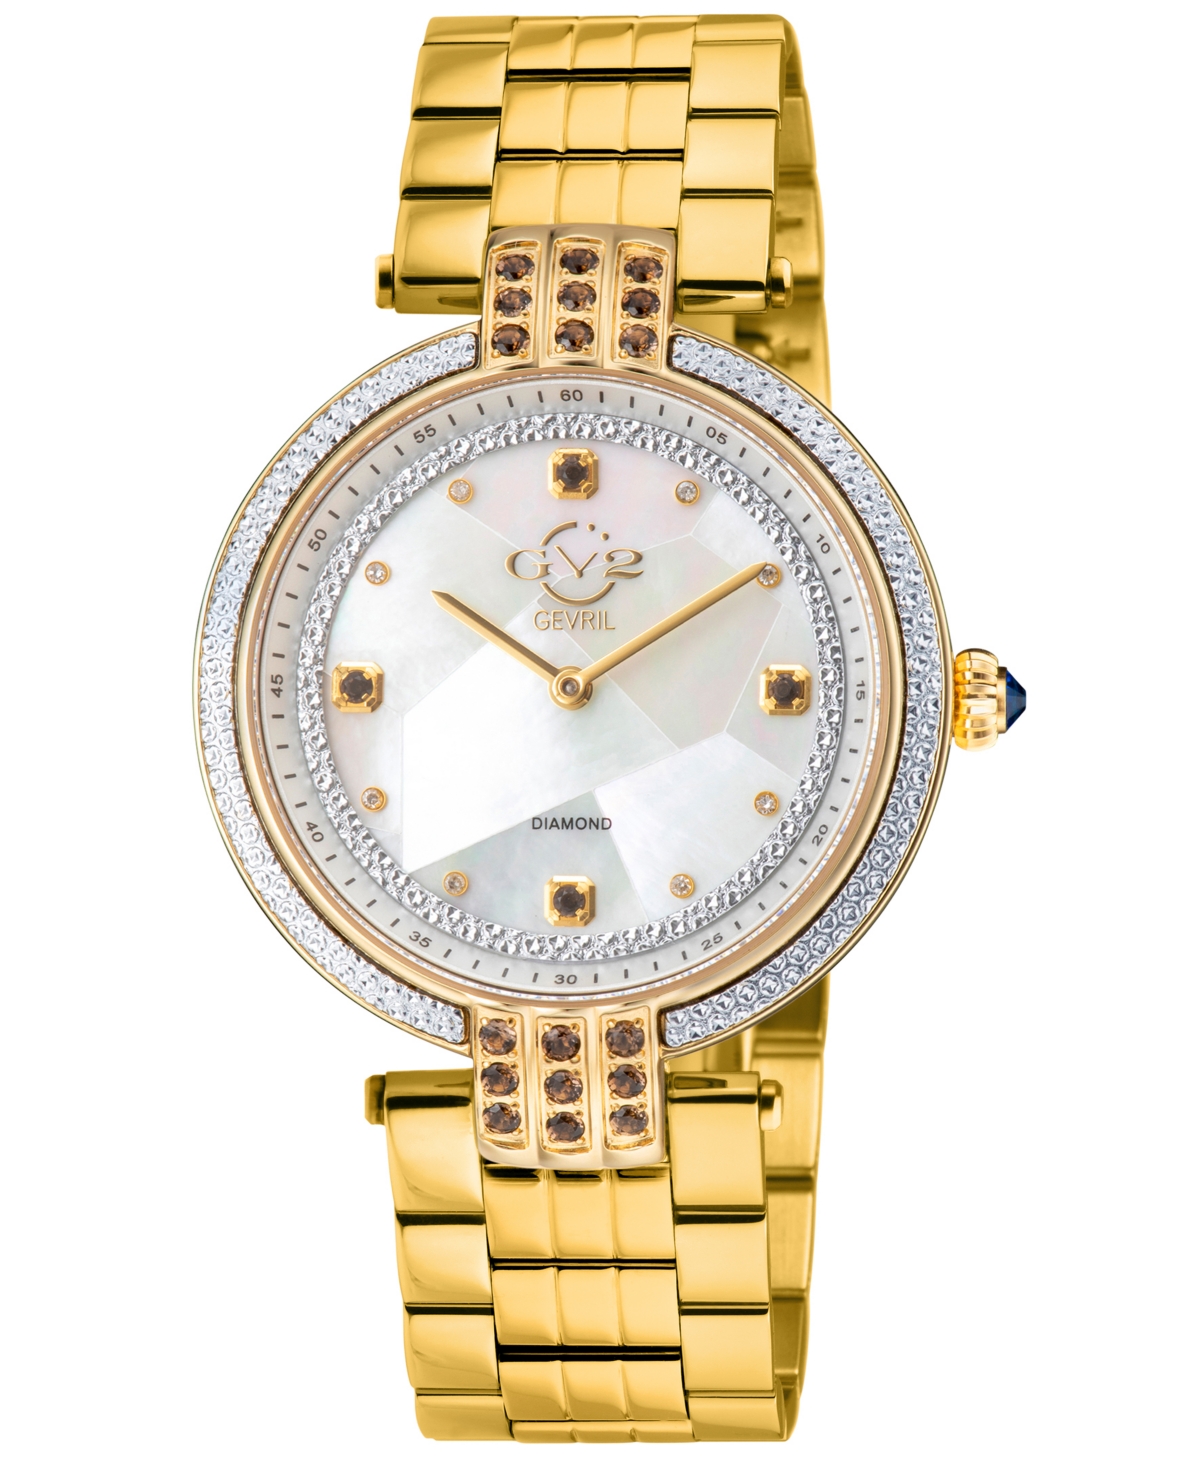 Gv2 By Gevril Women's Matera Swiss Quartz Gold-tone Stainless Steel Watch 35mm